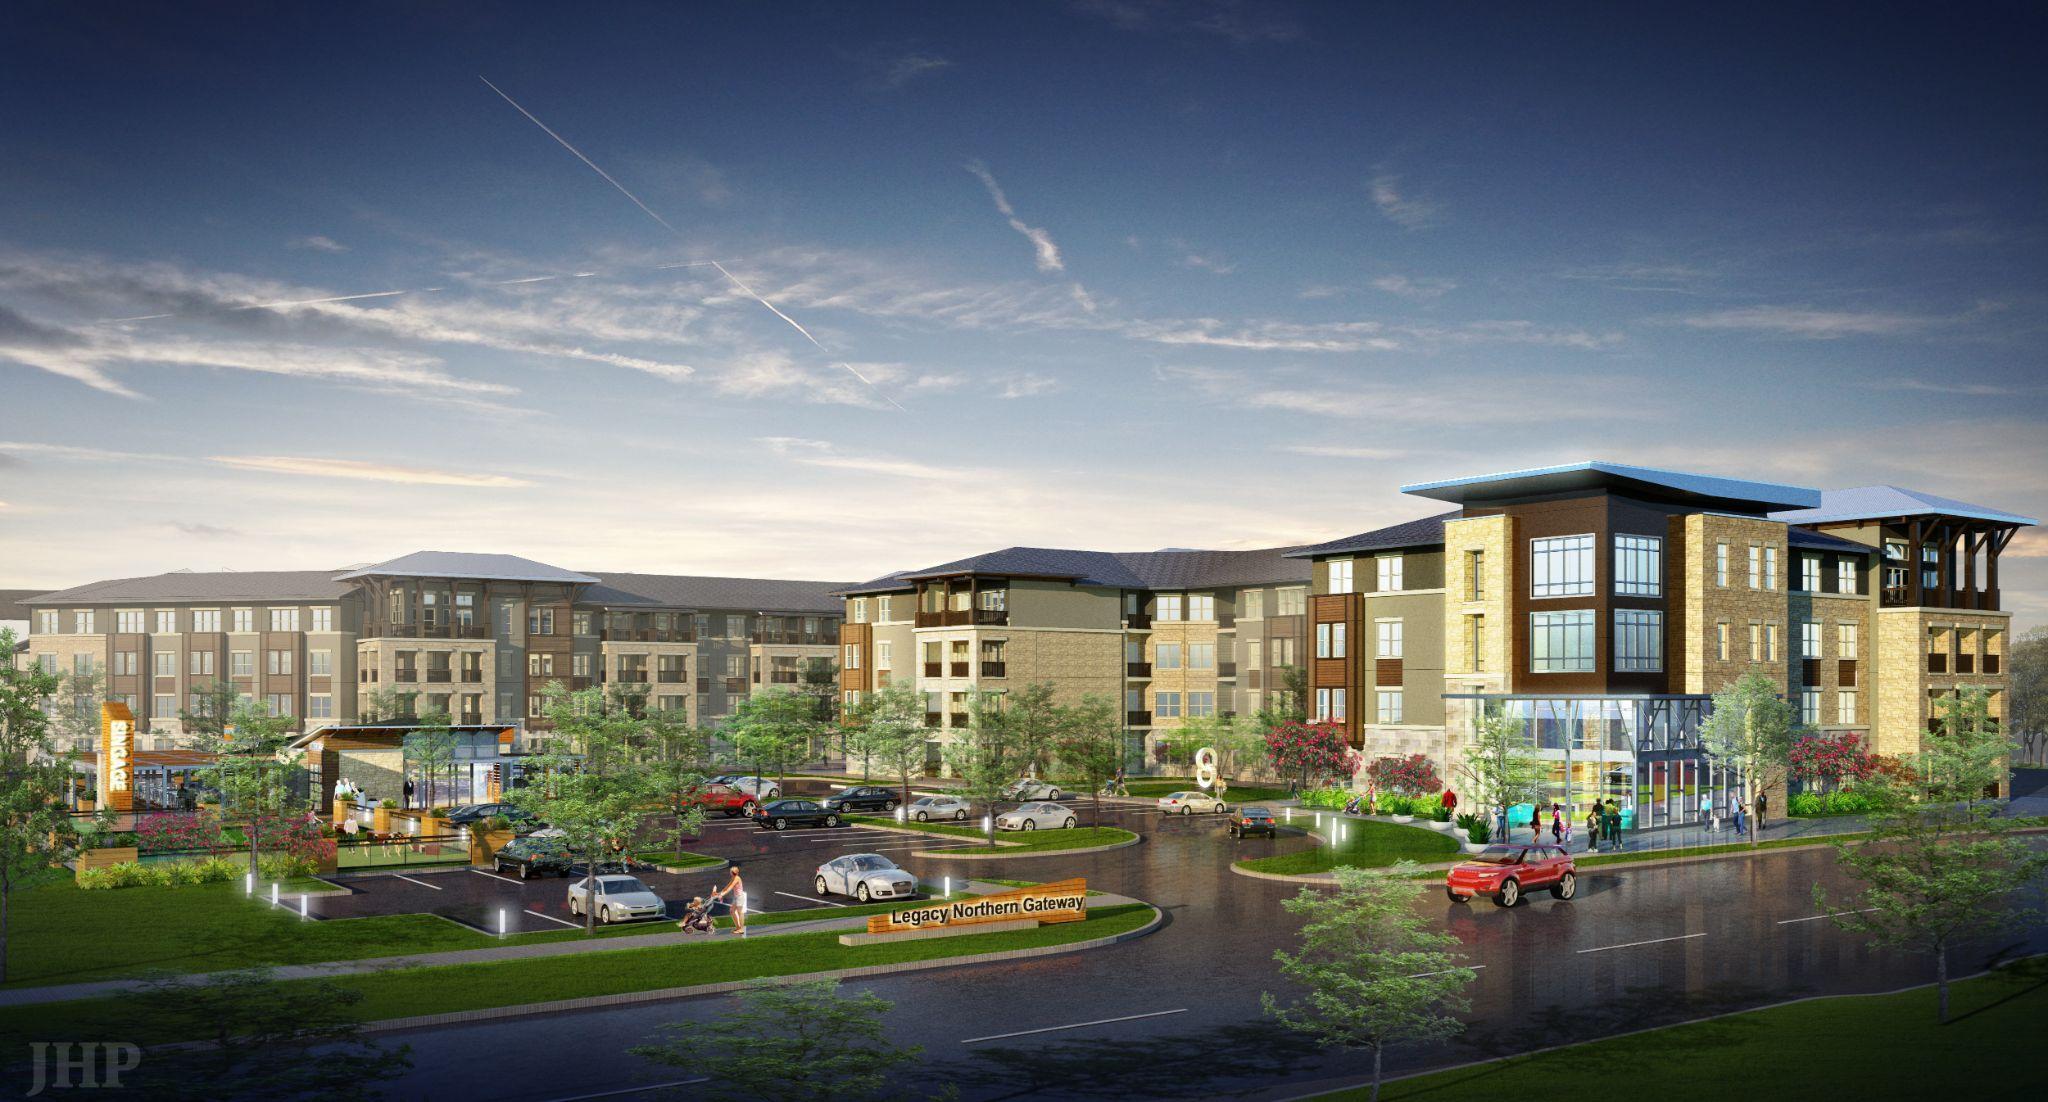 LEGACY PARTNERS AND PONDMOON CAPITAL ANNOUNCE THE OPENING OF MERIT, A 296-RESIDENCE MIXED-USE COMMUNITY IN…